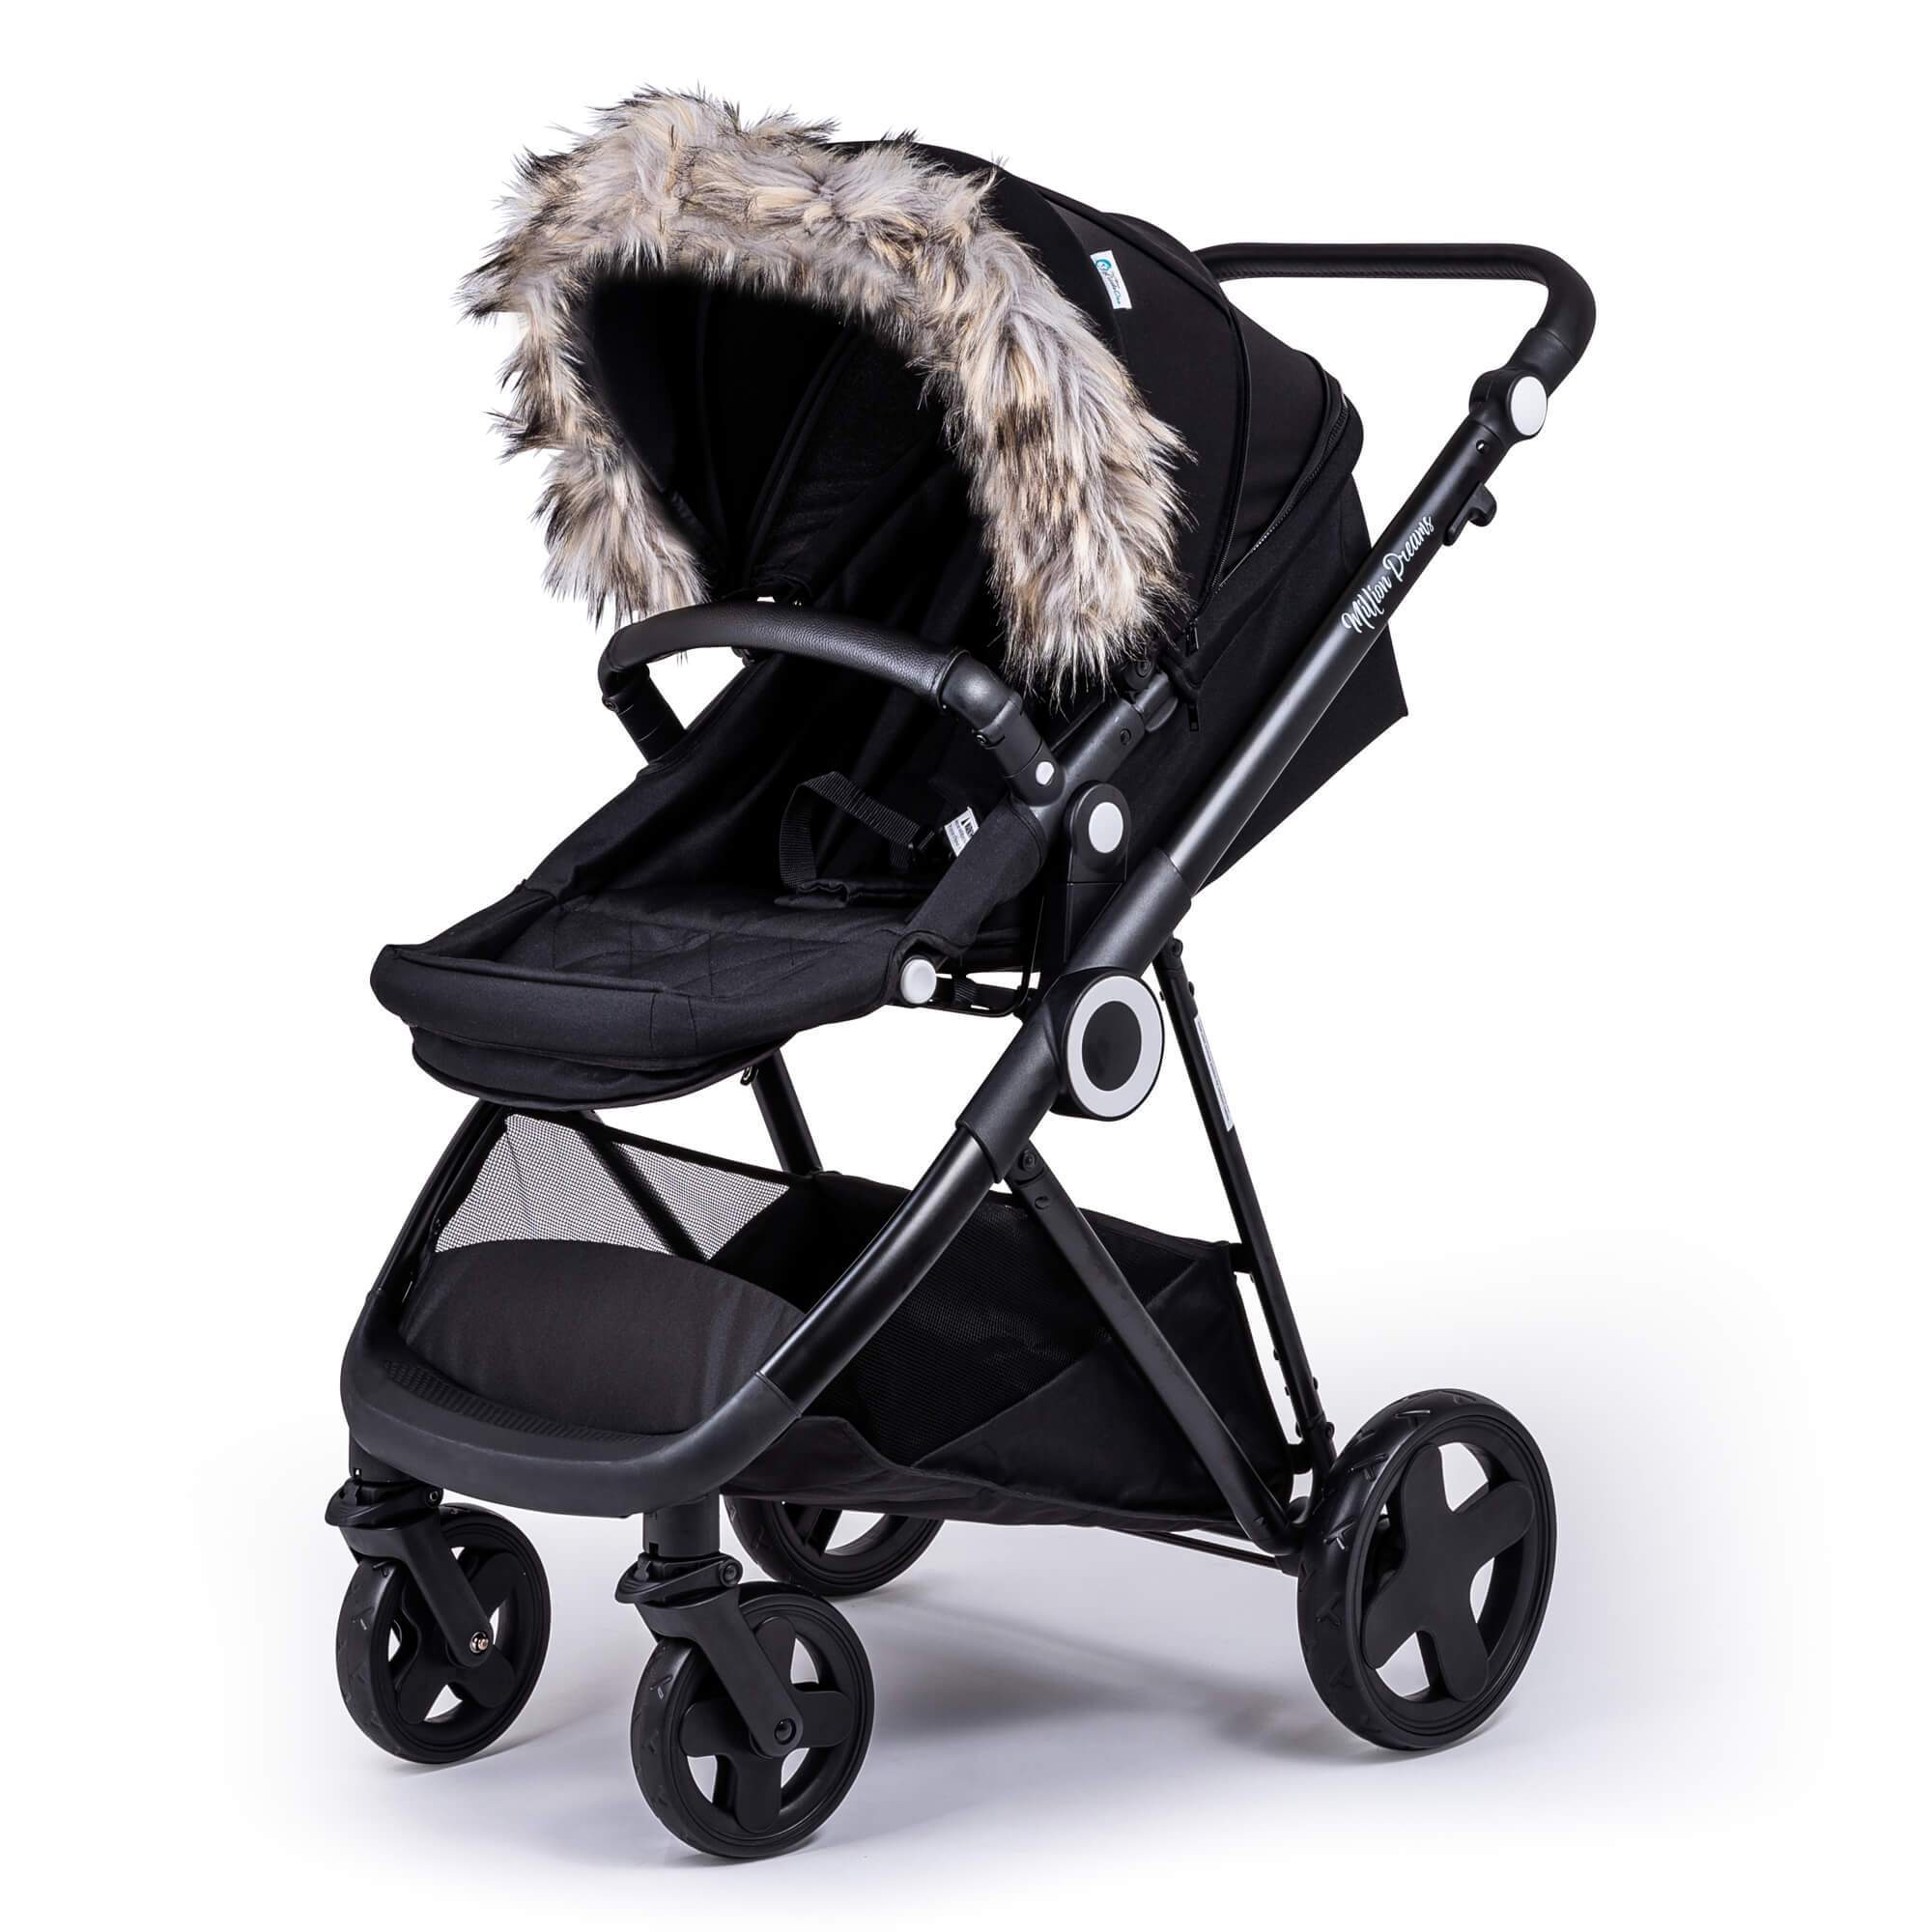 Pram Fur Hood Trim Attachment for Pushchair Compatible with Zeta - Light Grey / Fits All Models | For Your Little One